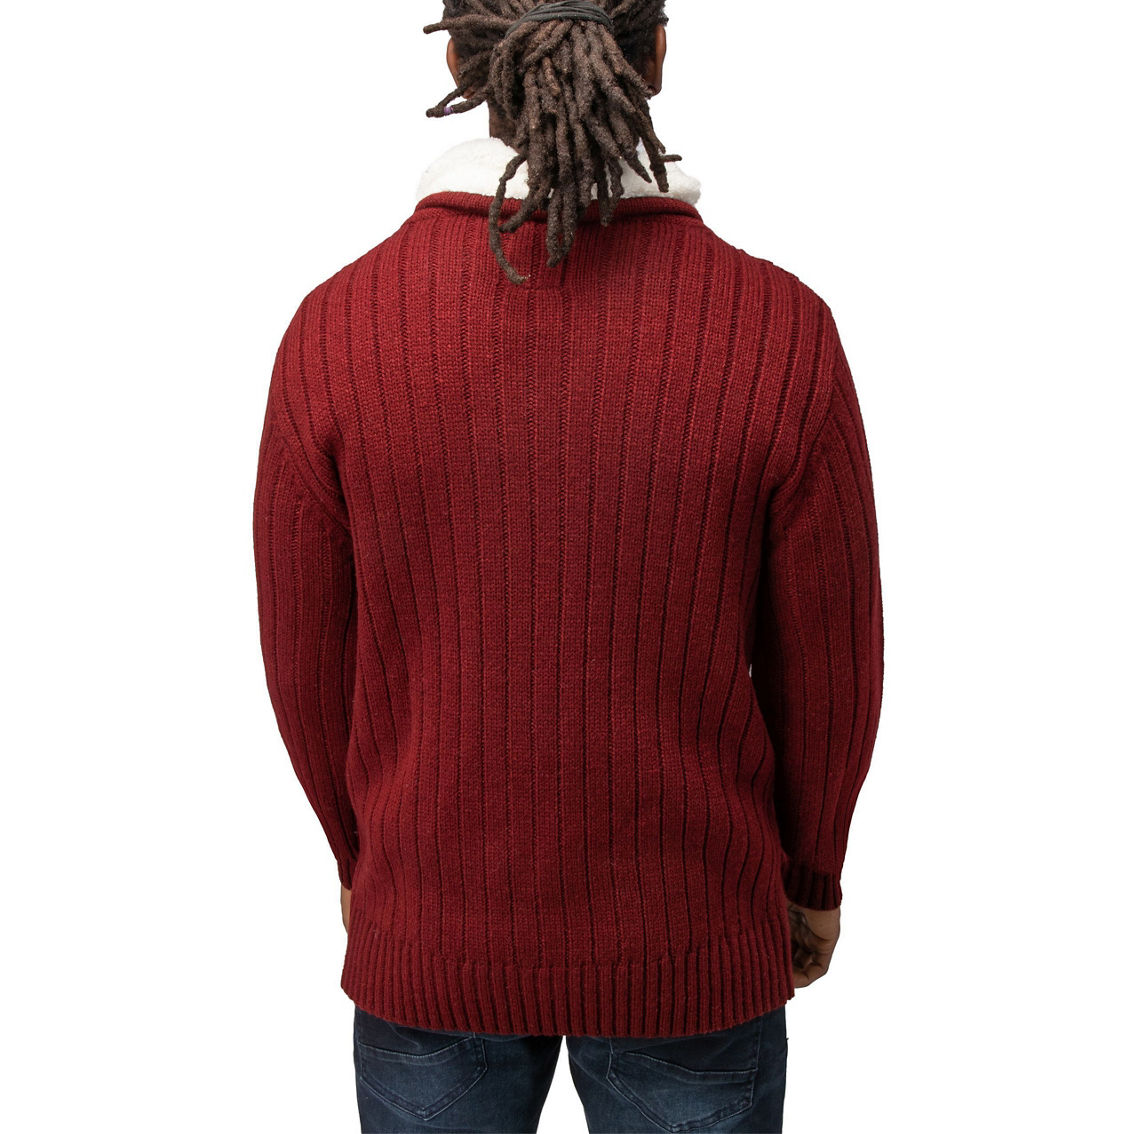 Men's Cable Knit Cowl Neck Sweater - Image 2 of 3